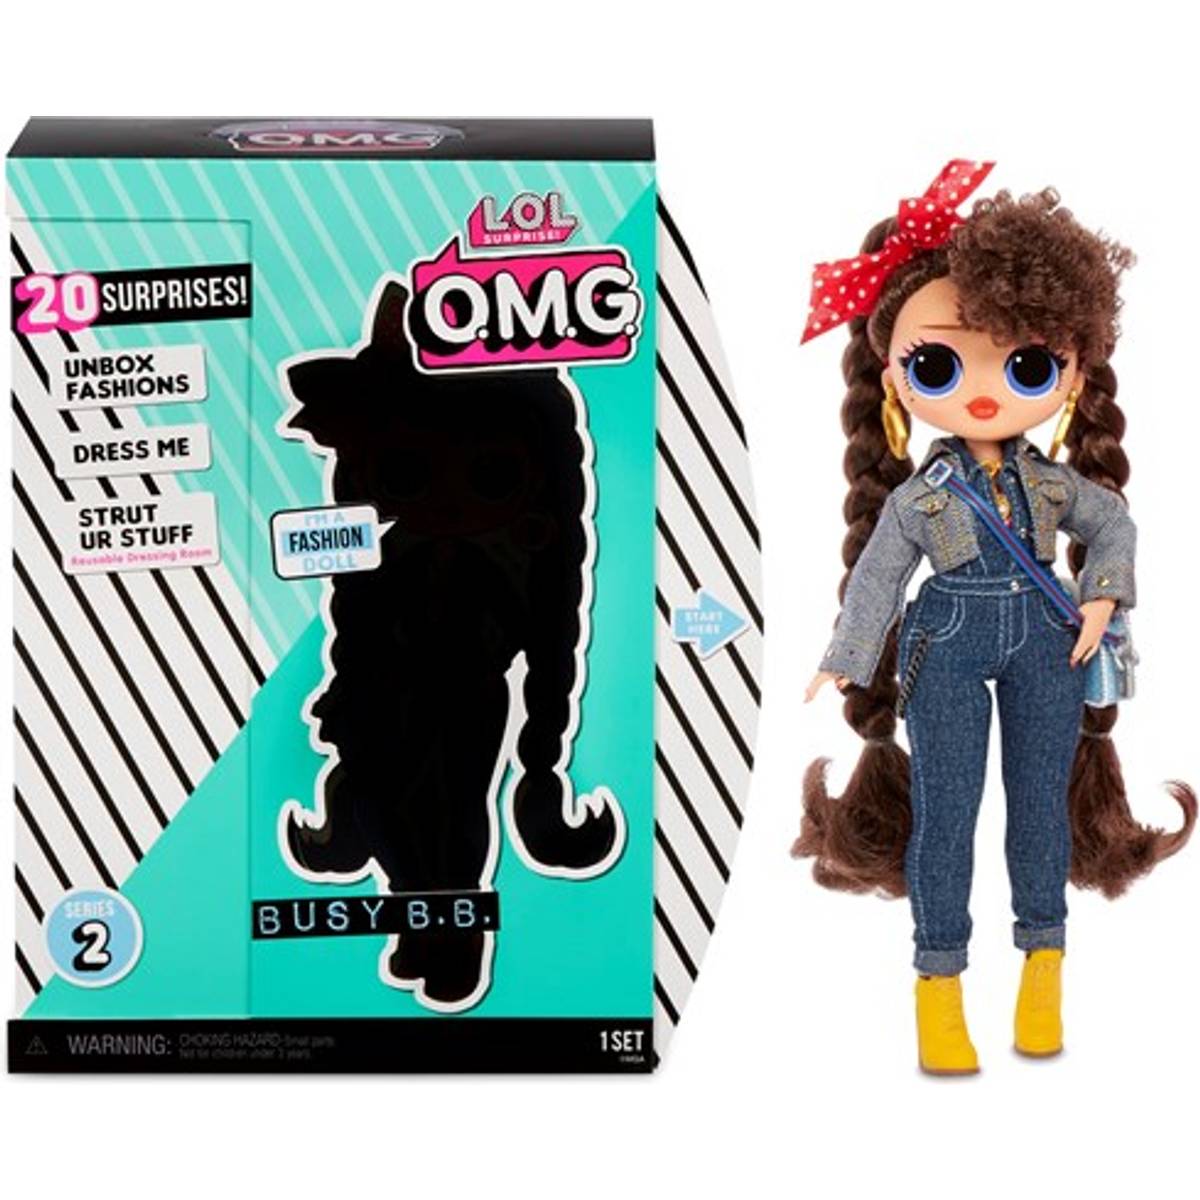 Lol omg doll • Find the lowest price • Save money at PriceRunner